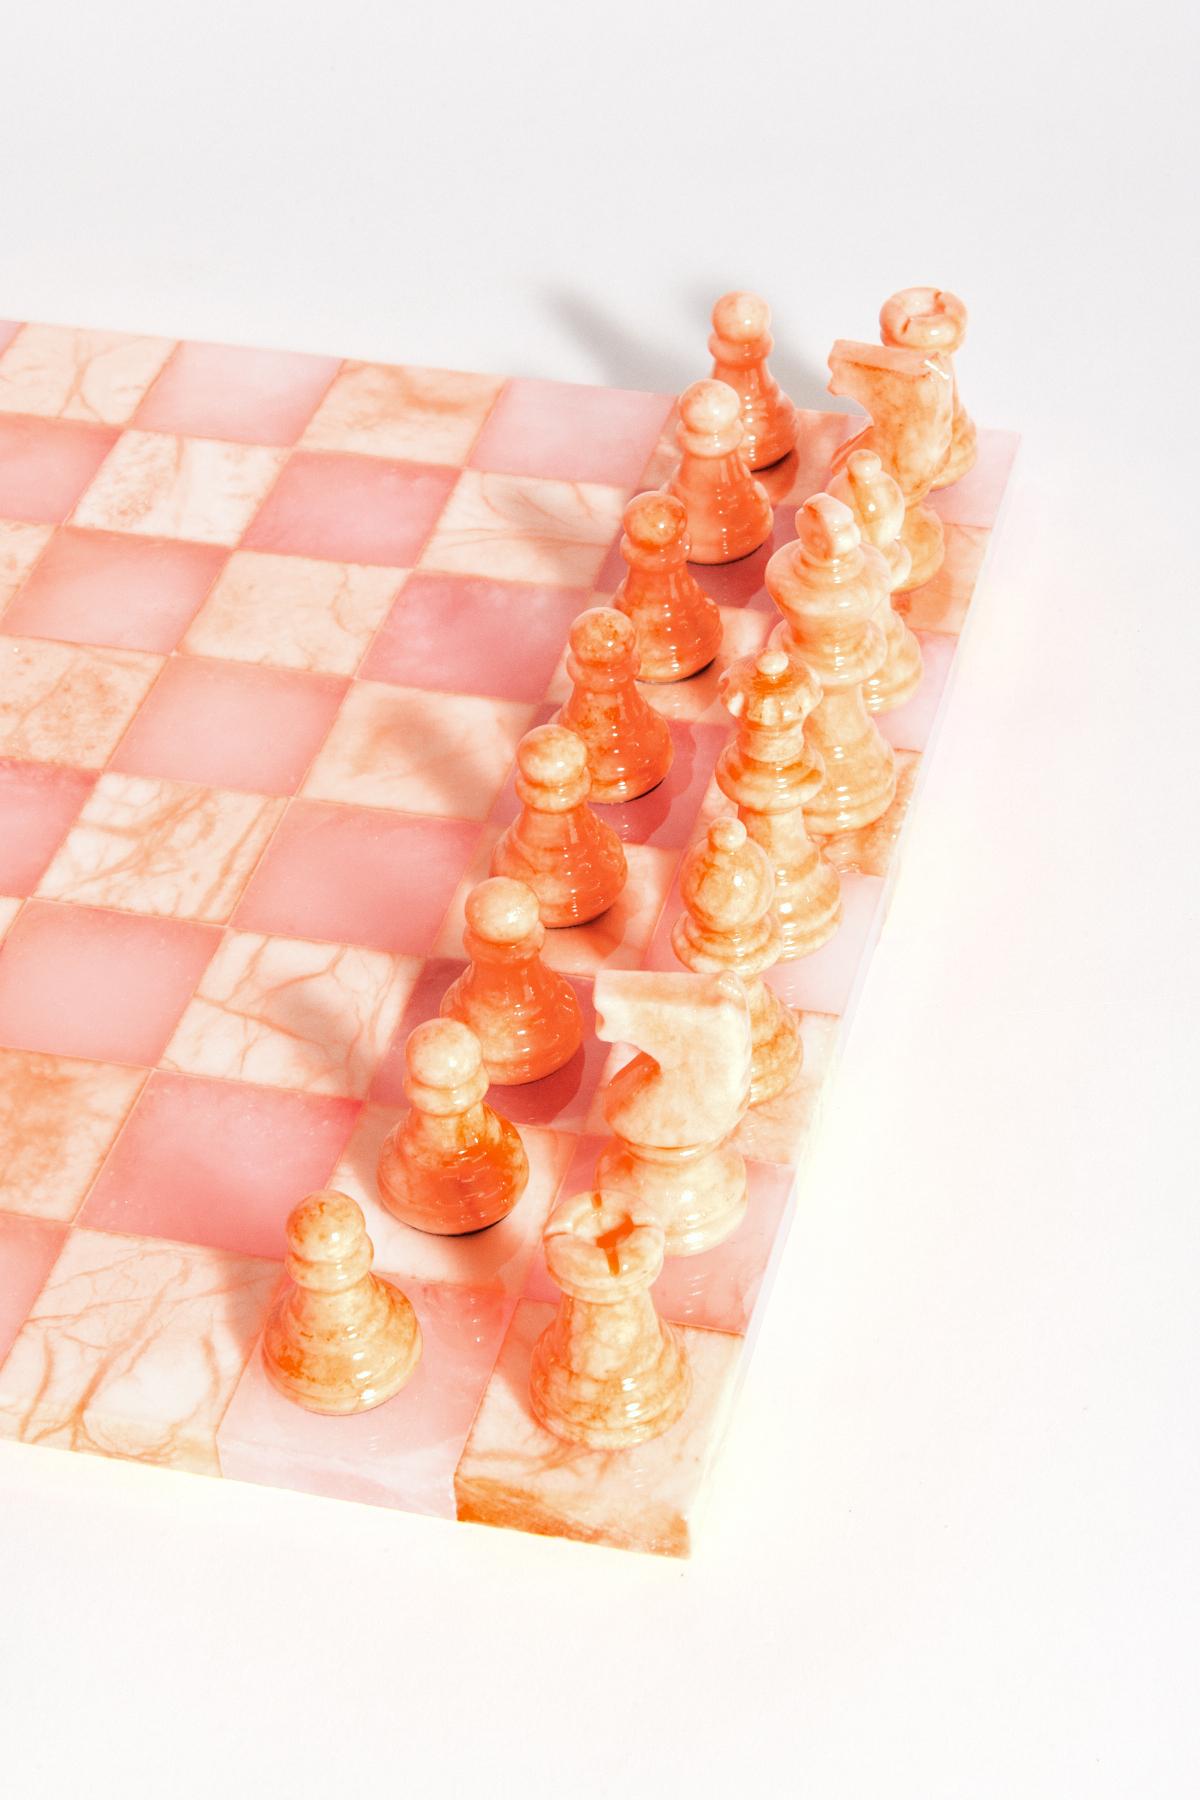 Skilled artisans carved this luxury chess set from Italian Alabaster, a natural stone native to Volterra, Italy. Each piece of Alabaster has a unique vein pattern so the colors may vary. Please treat with care and keep out of direct sunlight. Clean